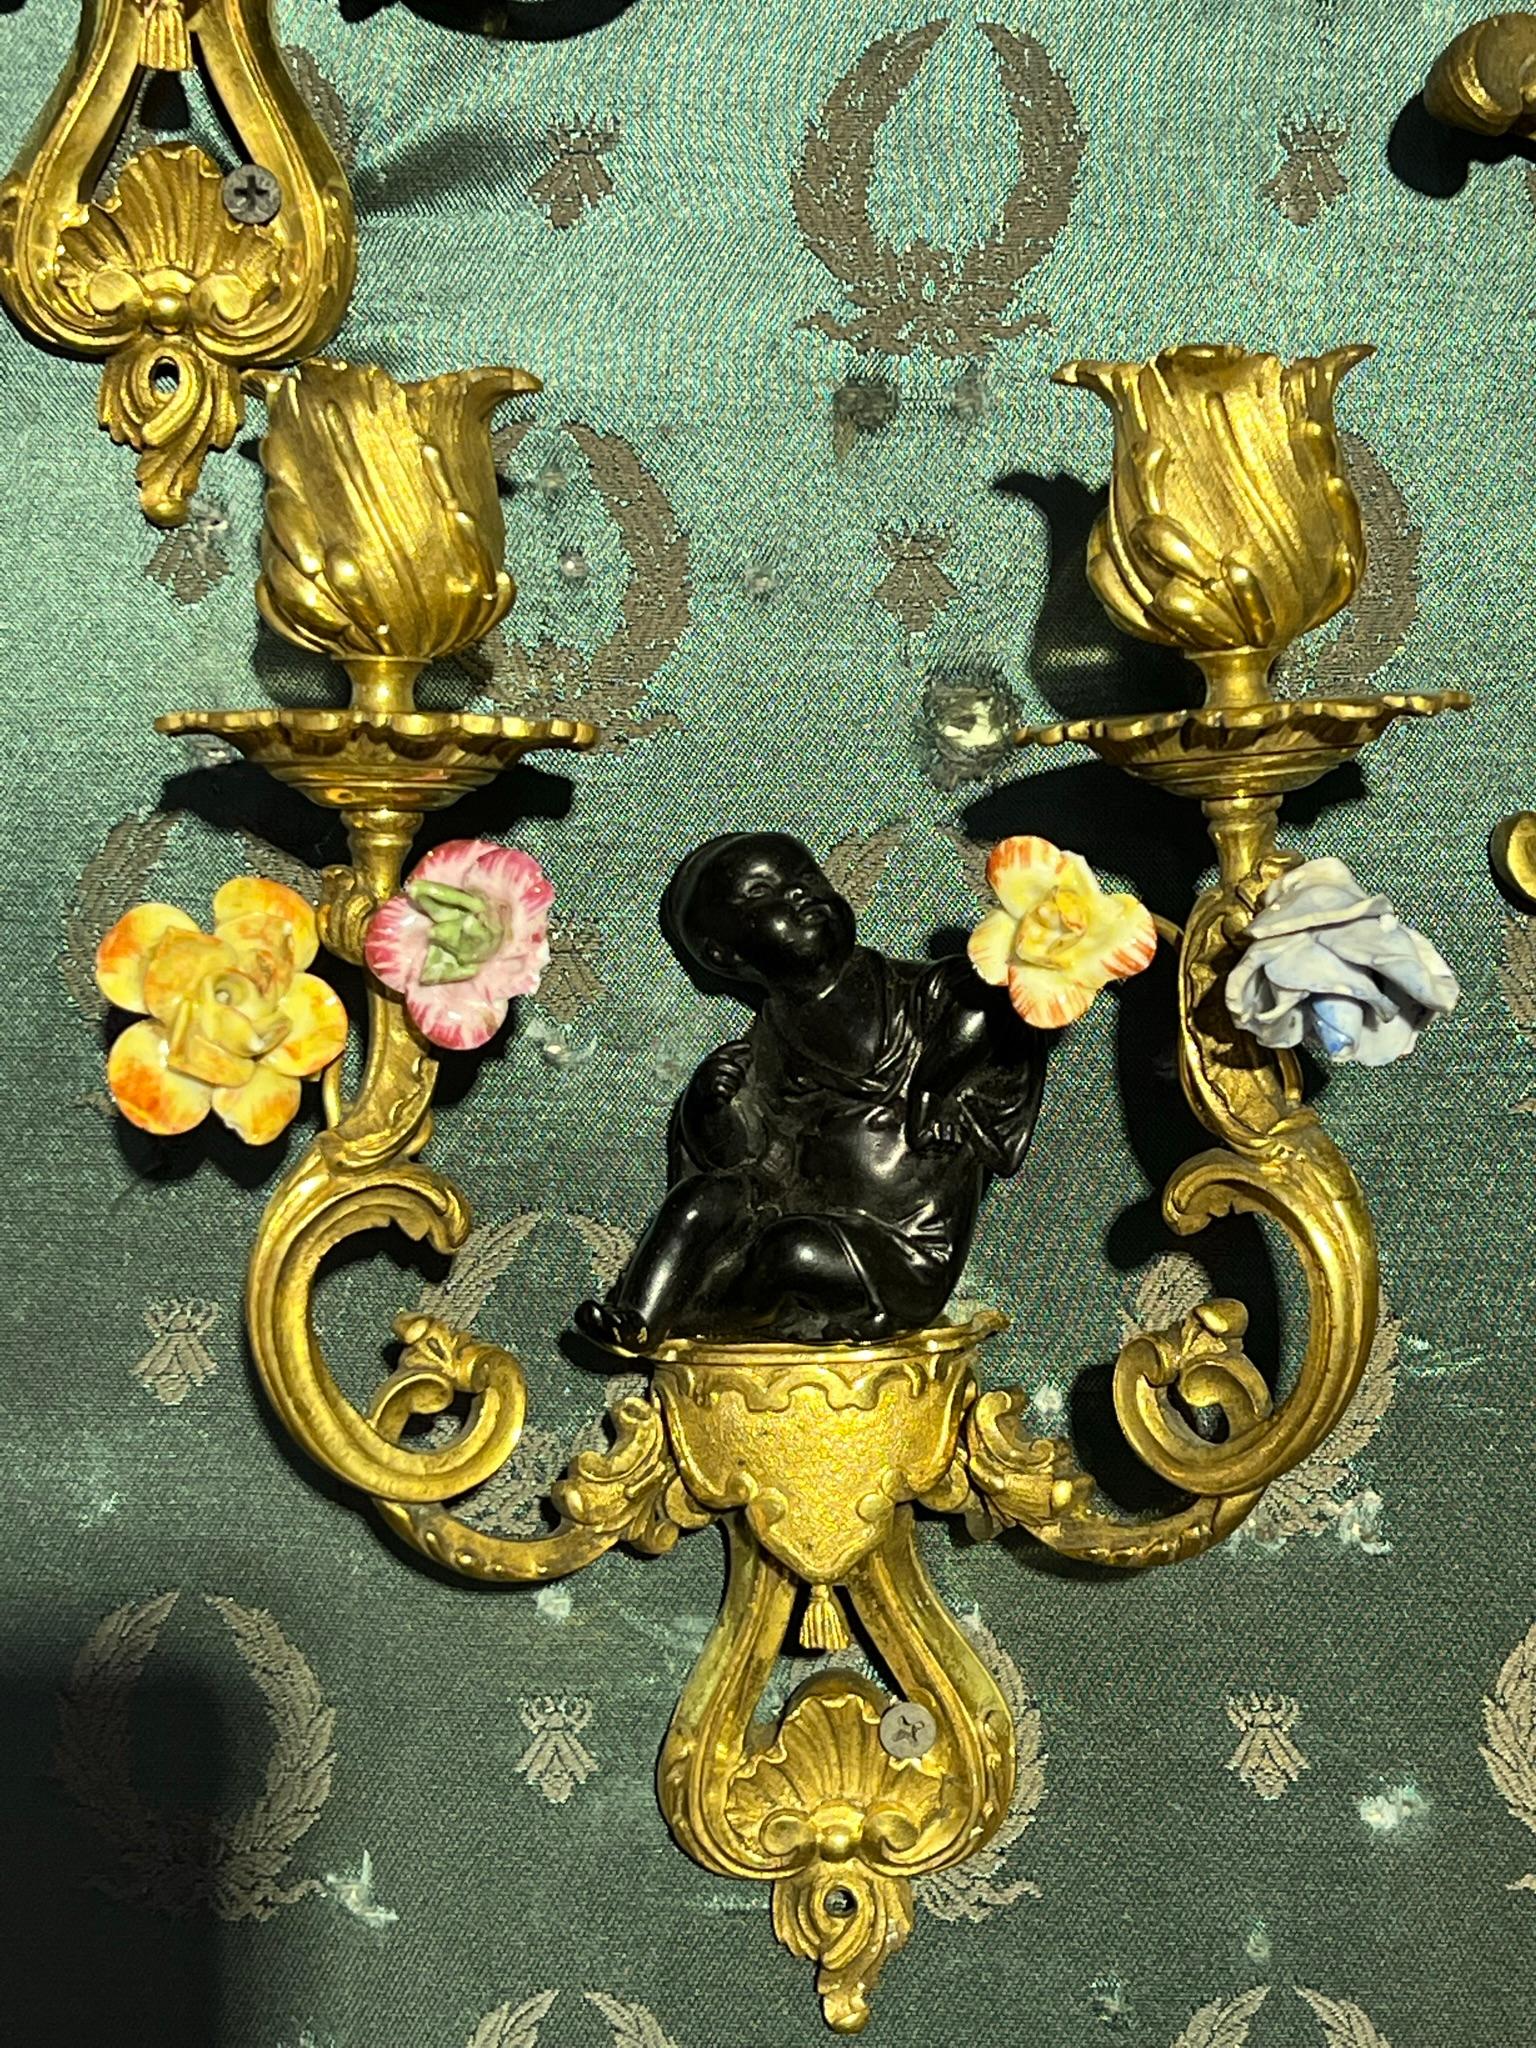 Pair of very fine quality and unusual 19 century French Chinoiserie Gilt Bronze and Porcelain Sconces with Buddha motif.